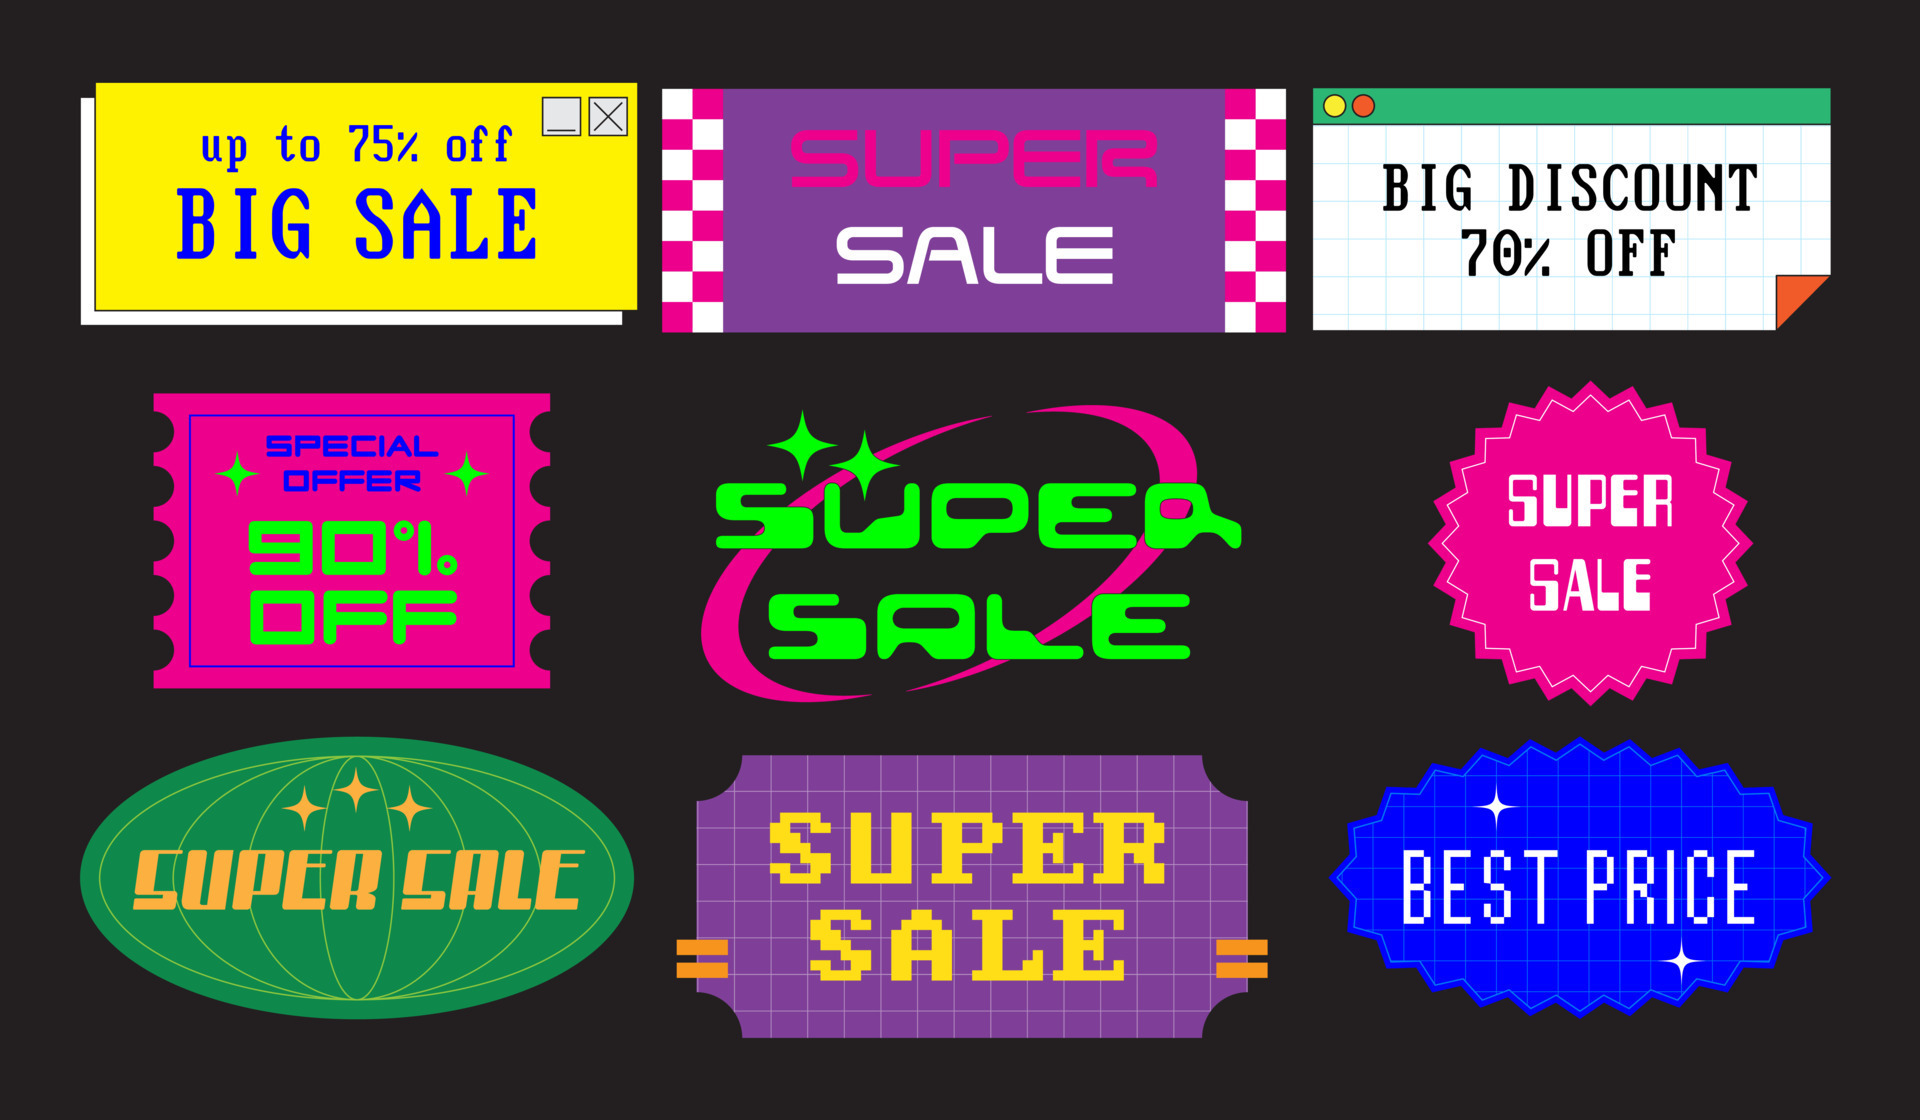 Cool sticker pack. Collection Trendy Badges with lettering and